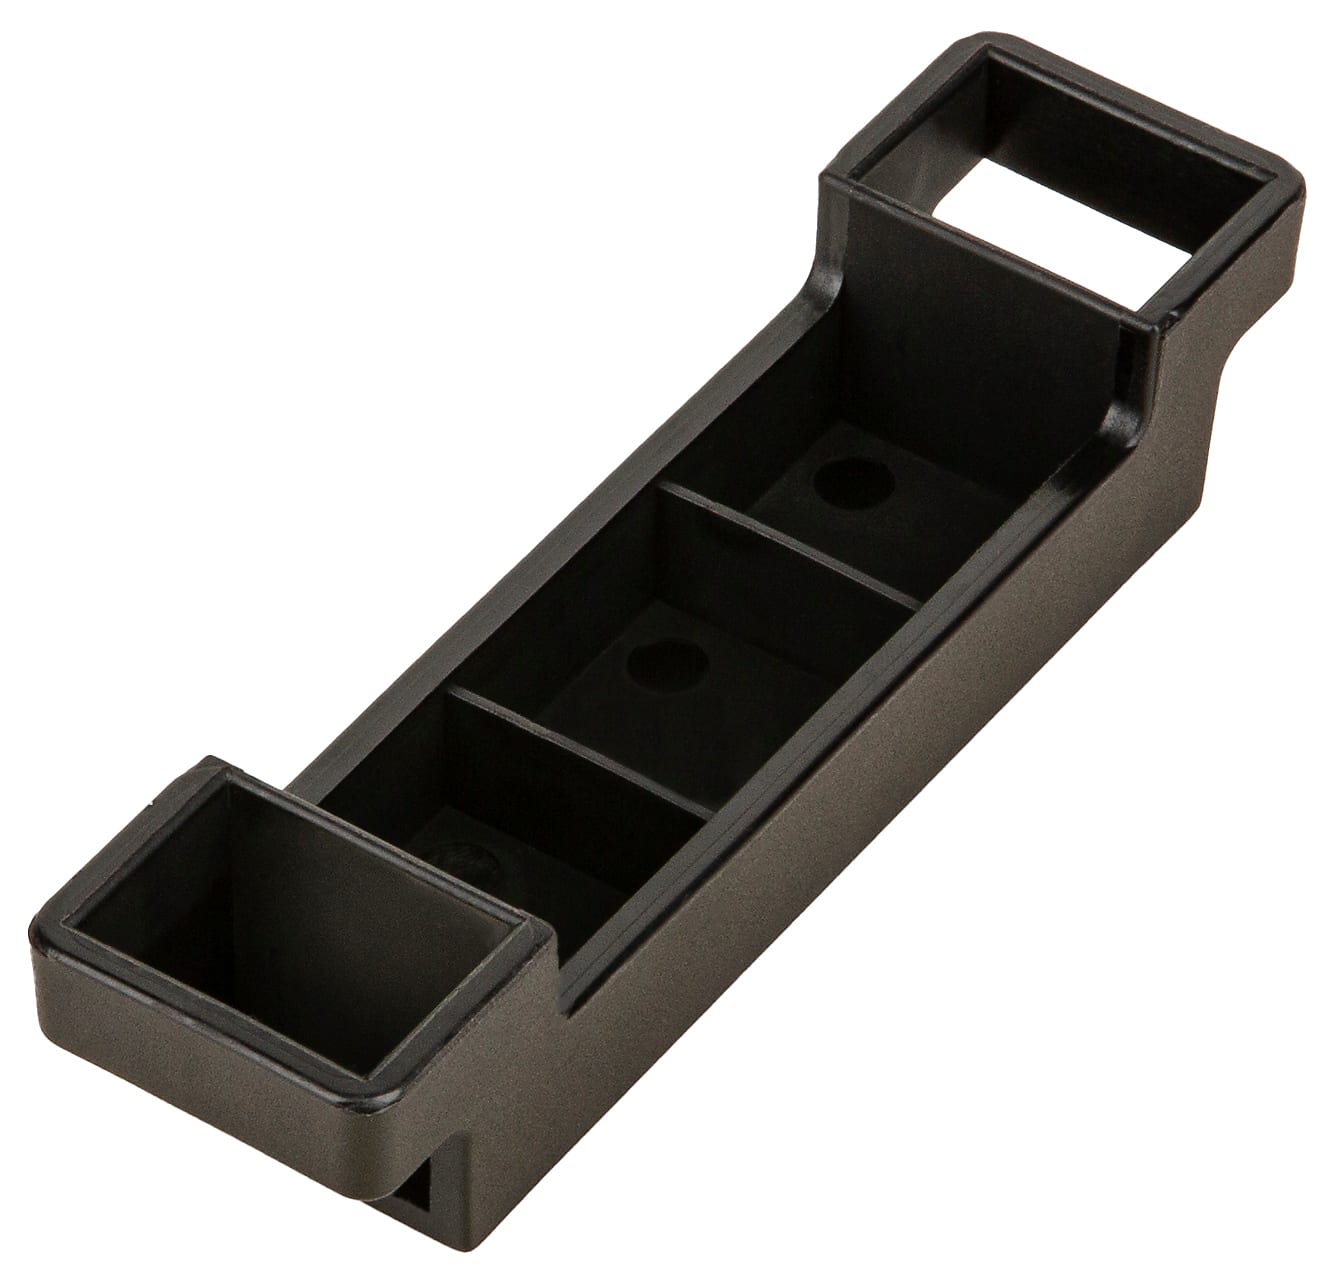 Rockboard Pedalboard QuickRelease Tool for Quickmount Plates